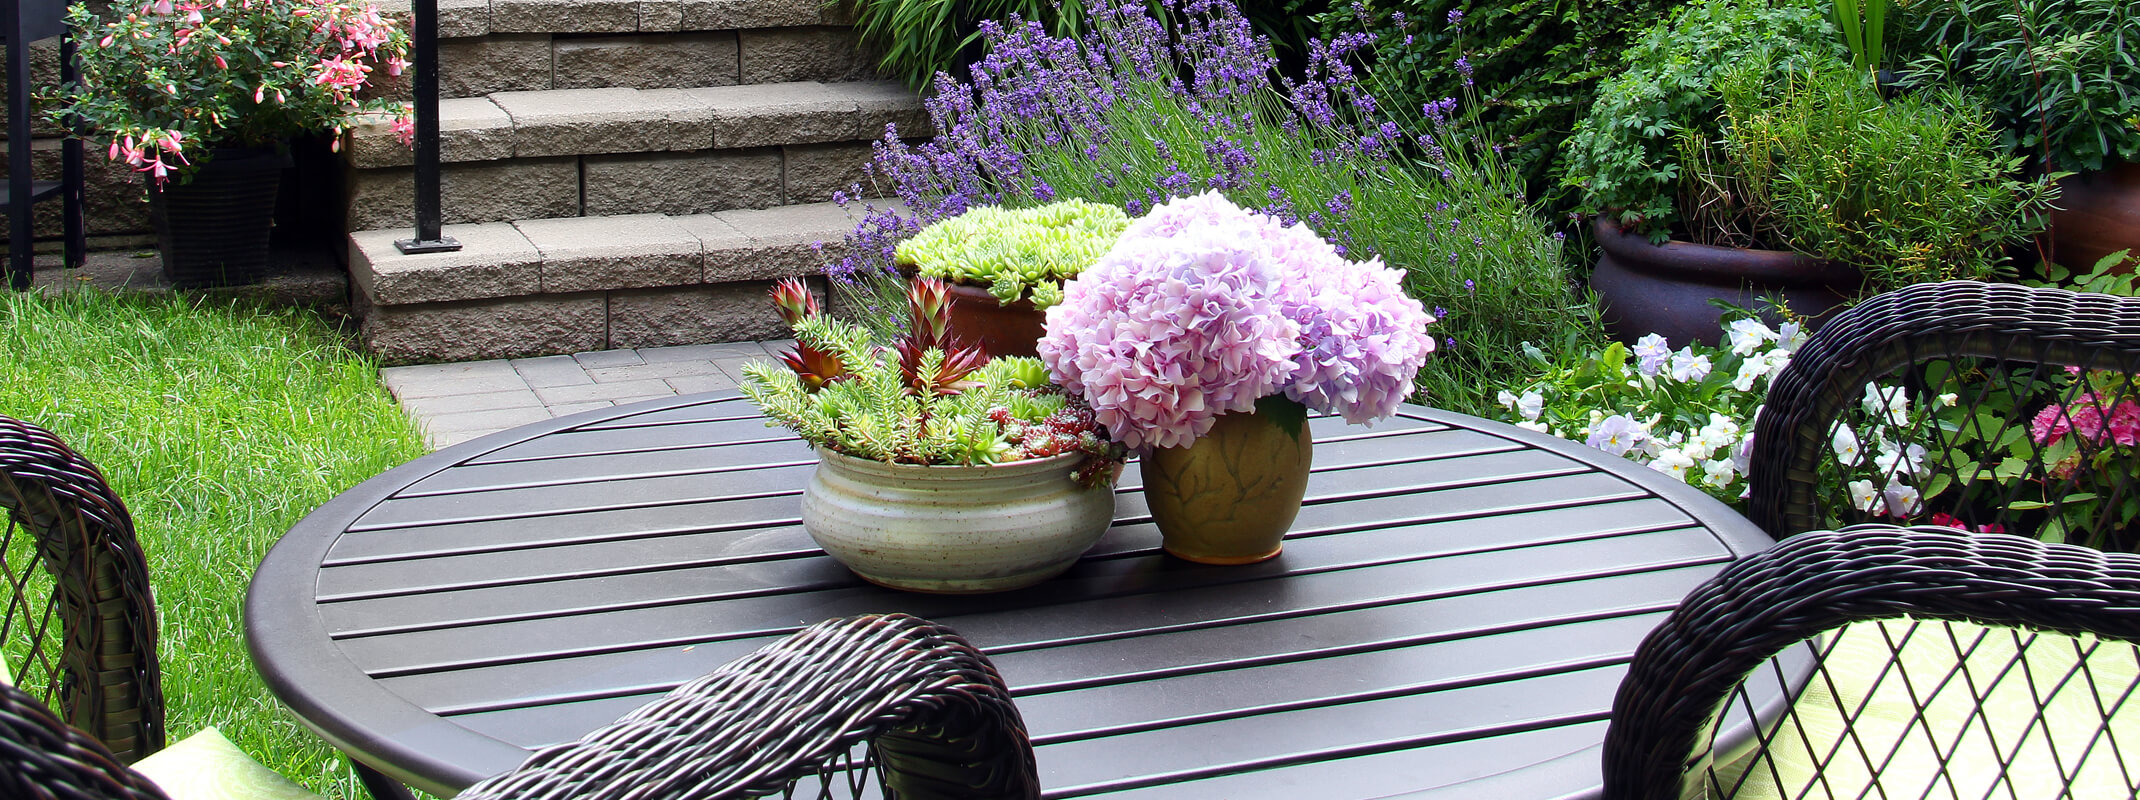 Beautiful patio with black table hydrangeas sitting on top and scented perennials growing and blooming all around